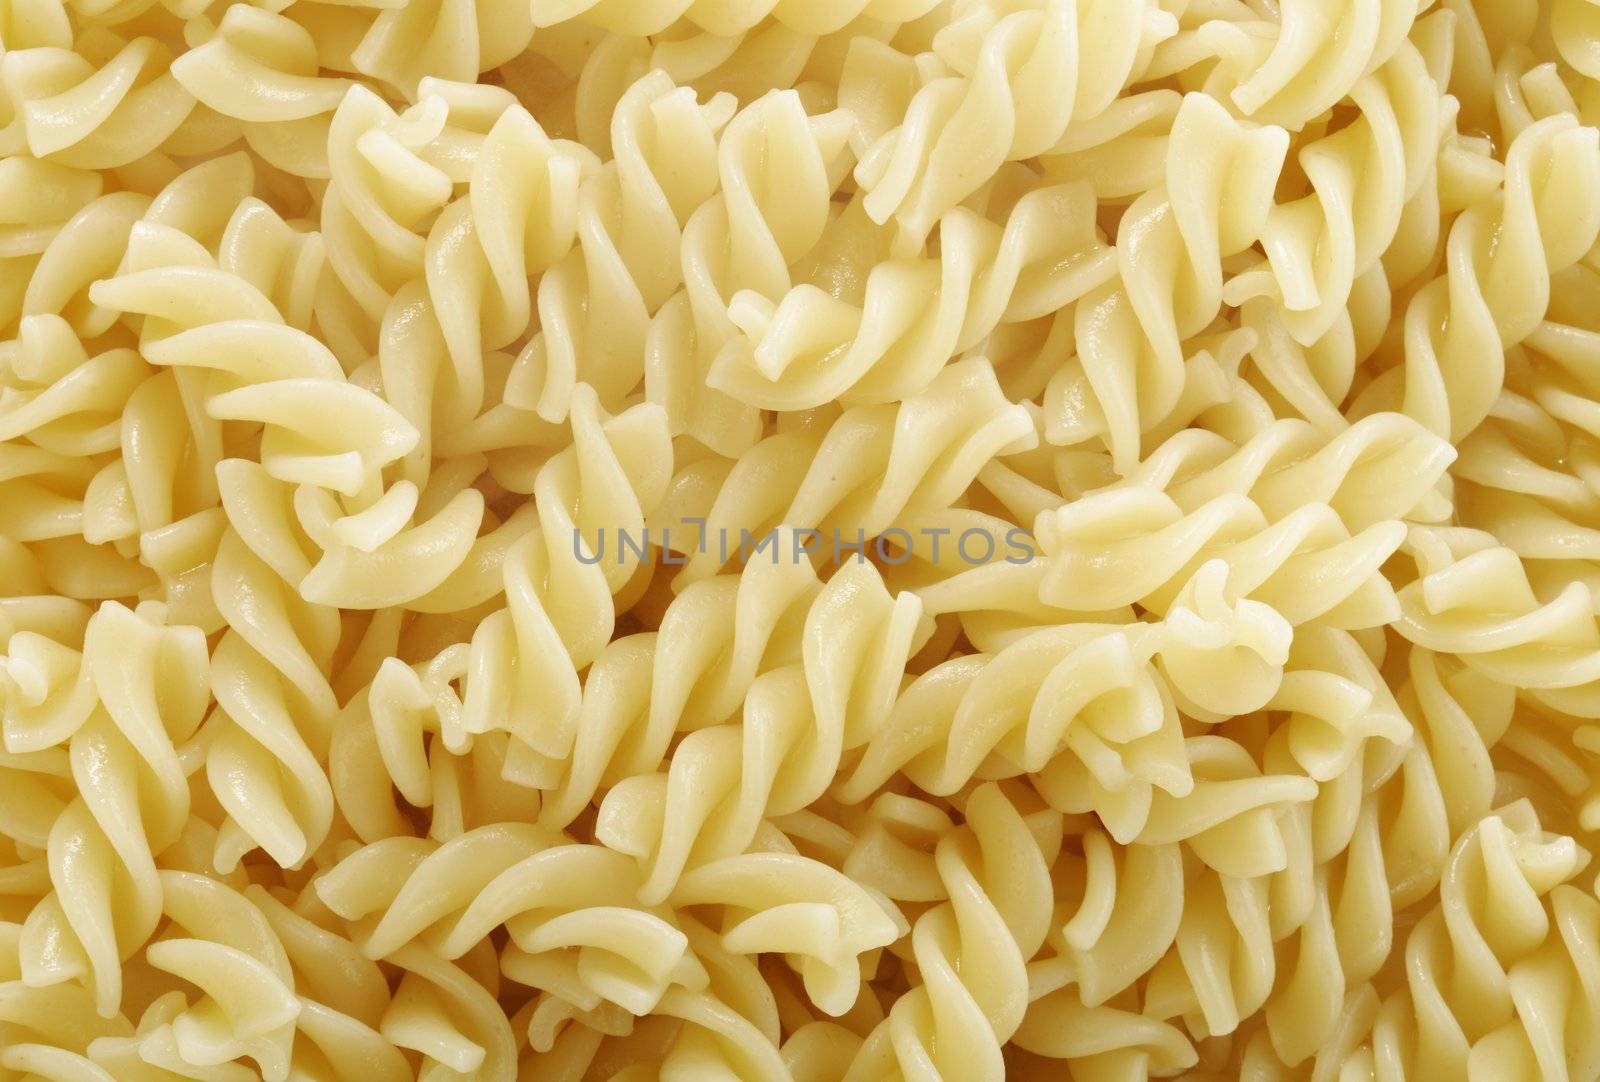 Cooked pasta fusilli by Stocksnapper